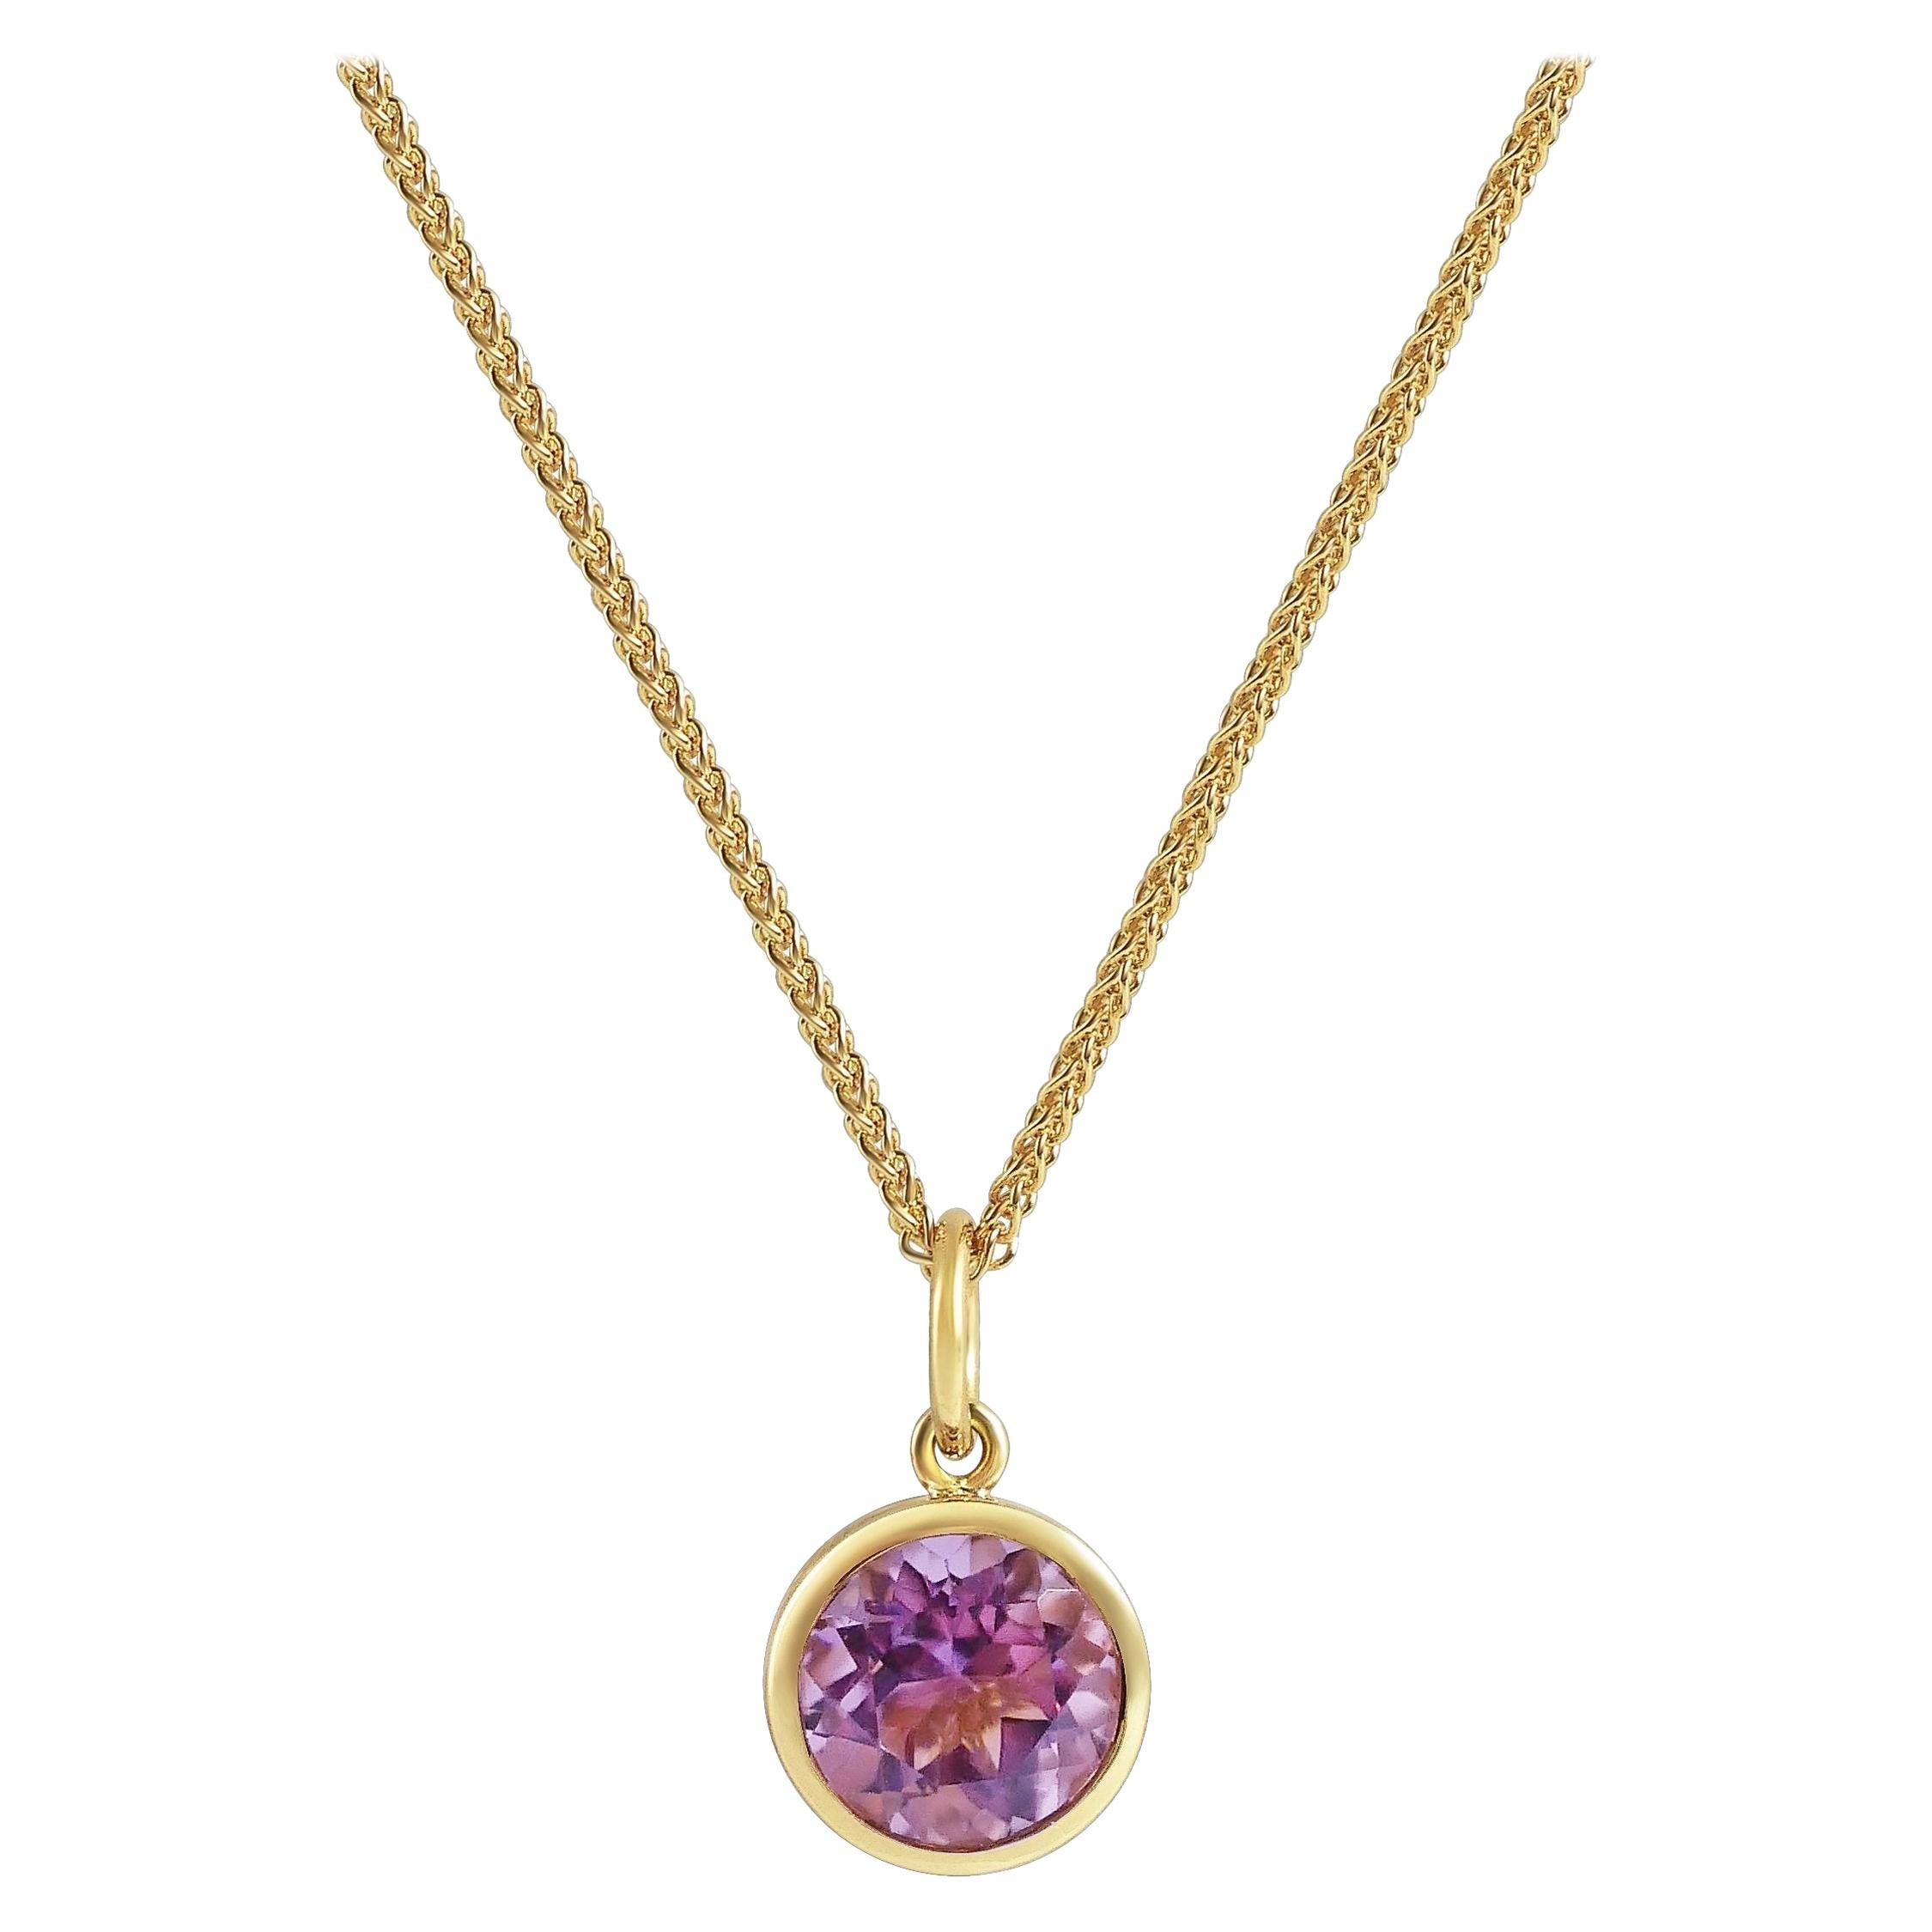 Handcrafted 1.20 Carats Amethyst 18 Karat Yellow Gold Pendant Necklace